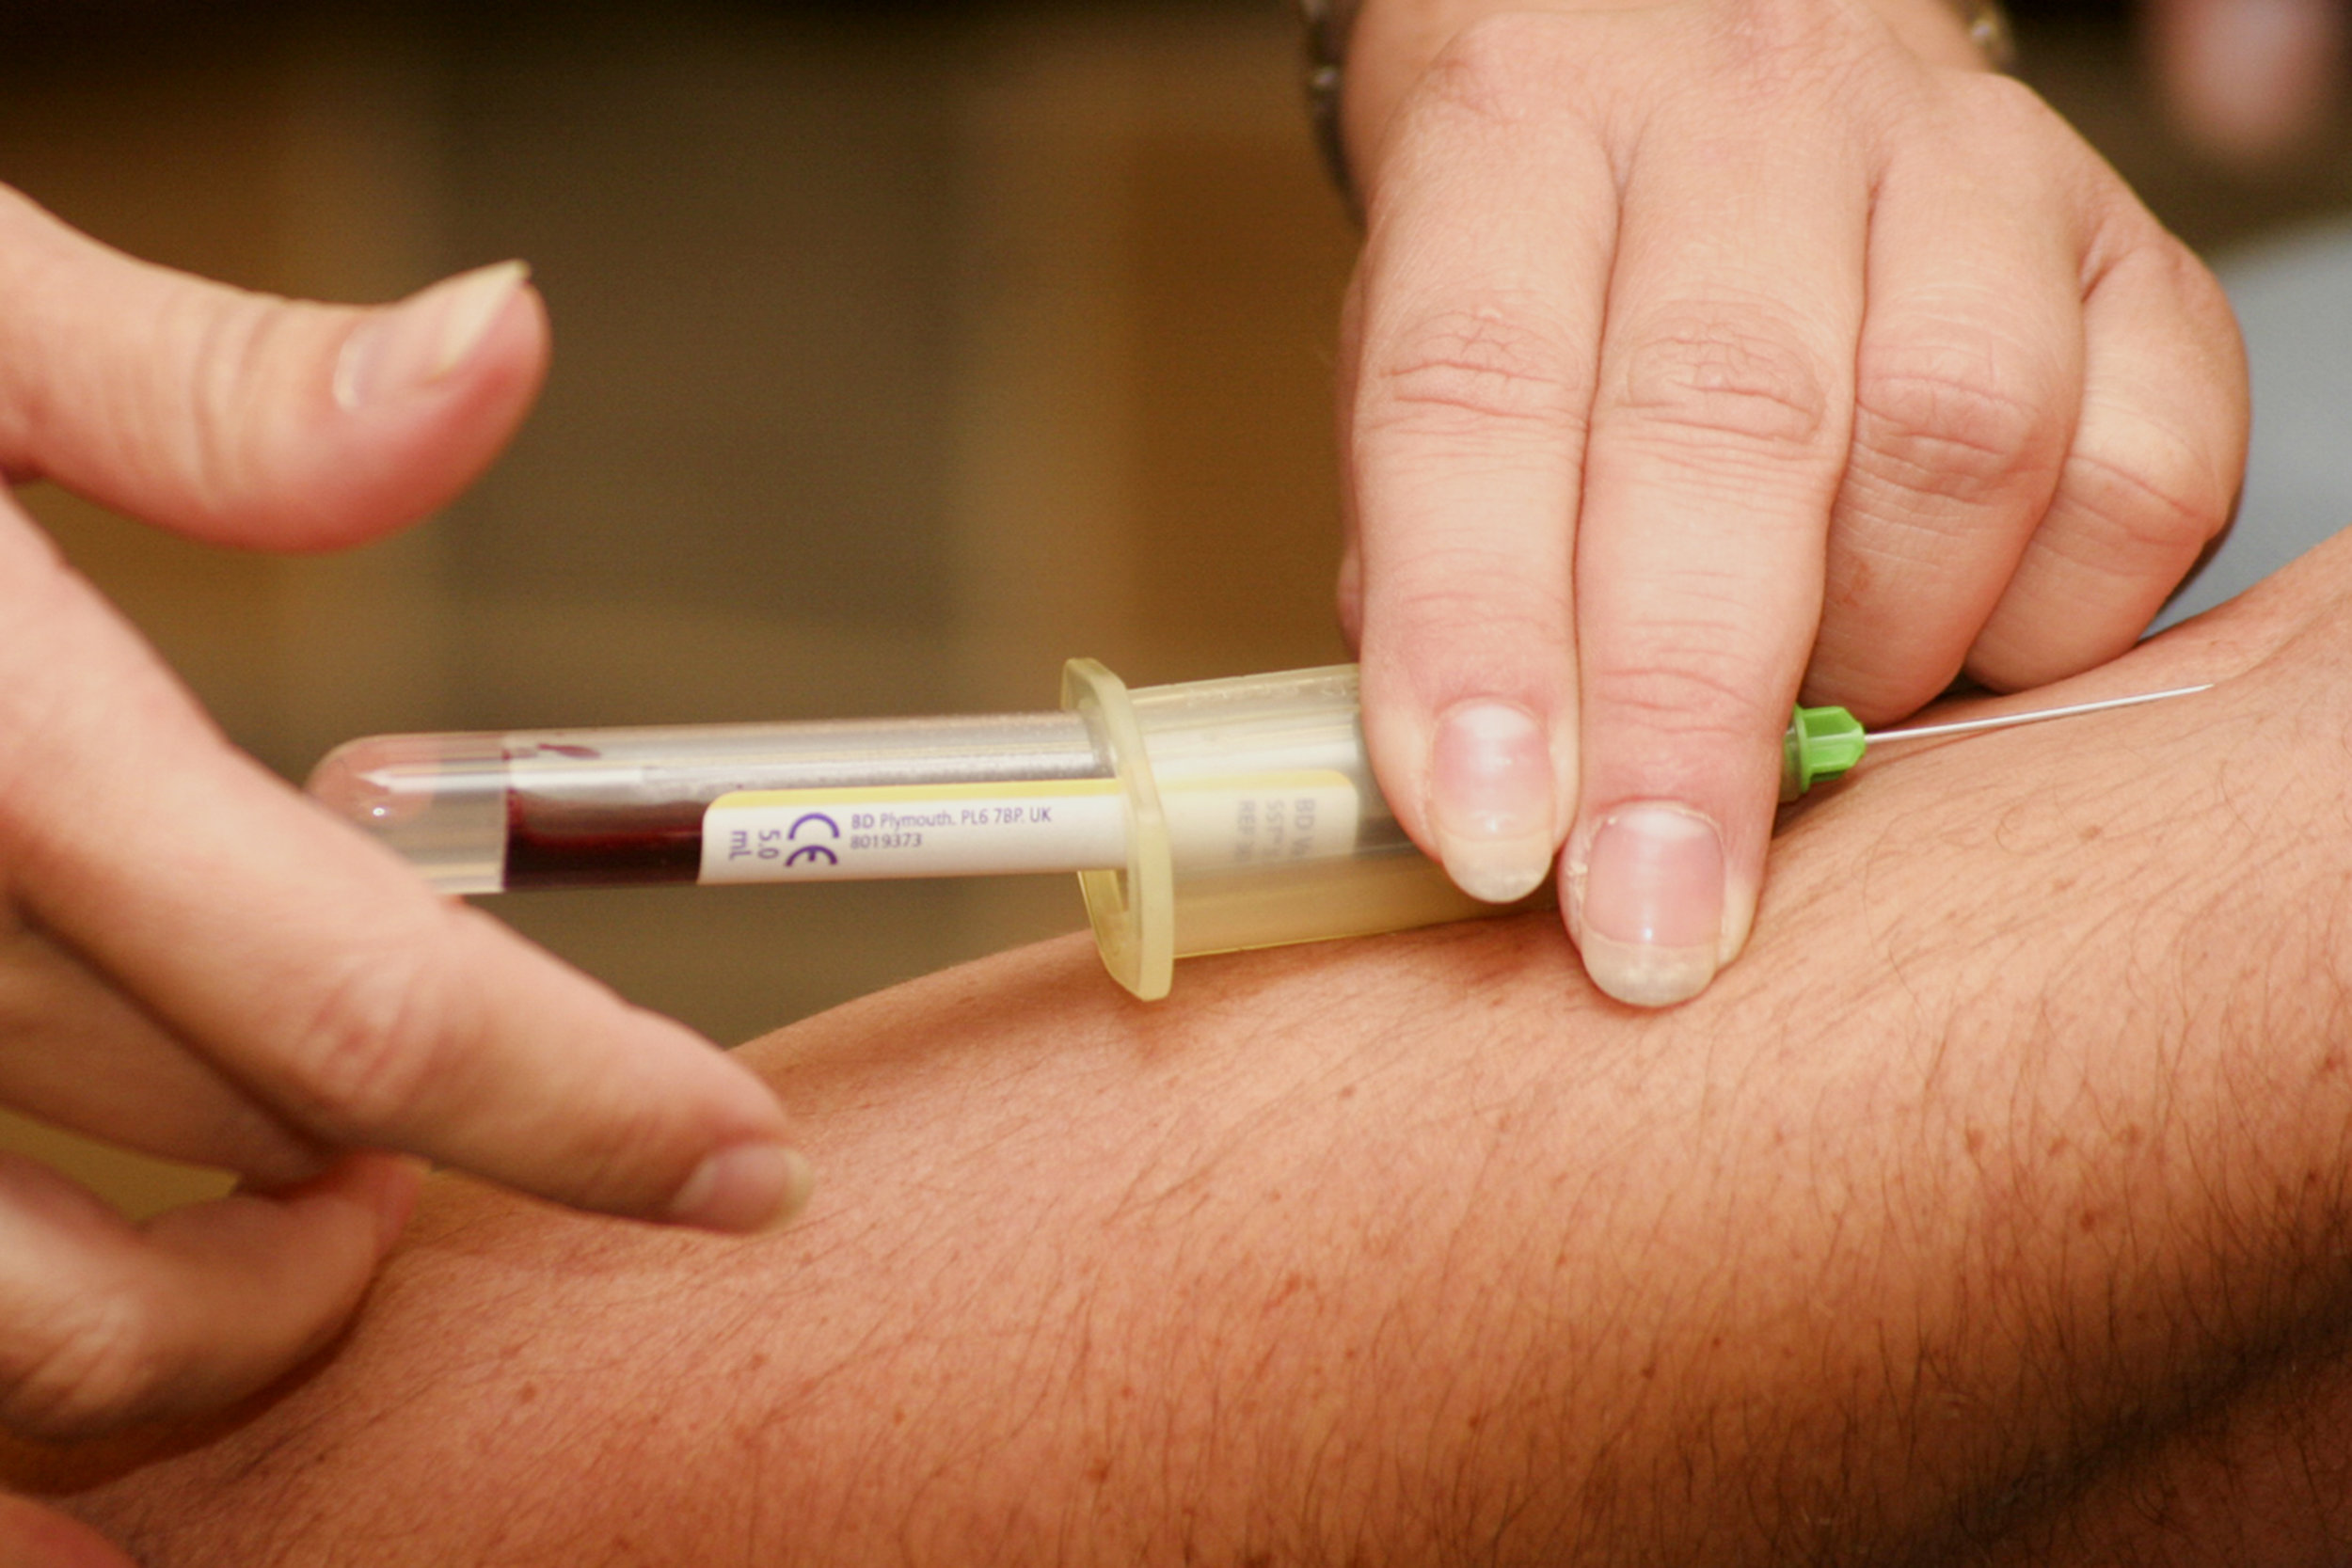 9 Tips That Will Improve Your Next “Stick” (Blood Draw or IV Start